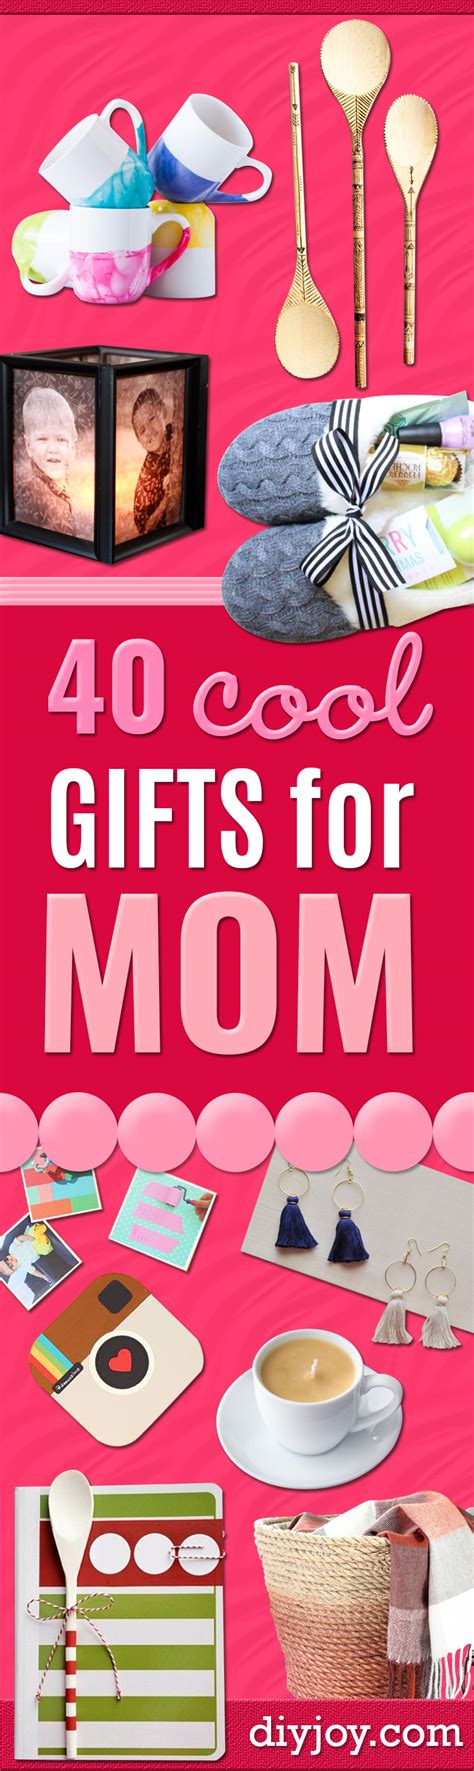 I'm so thankful to have grown up with a role model like you. 40 Coolest Gifts To Make for Mom